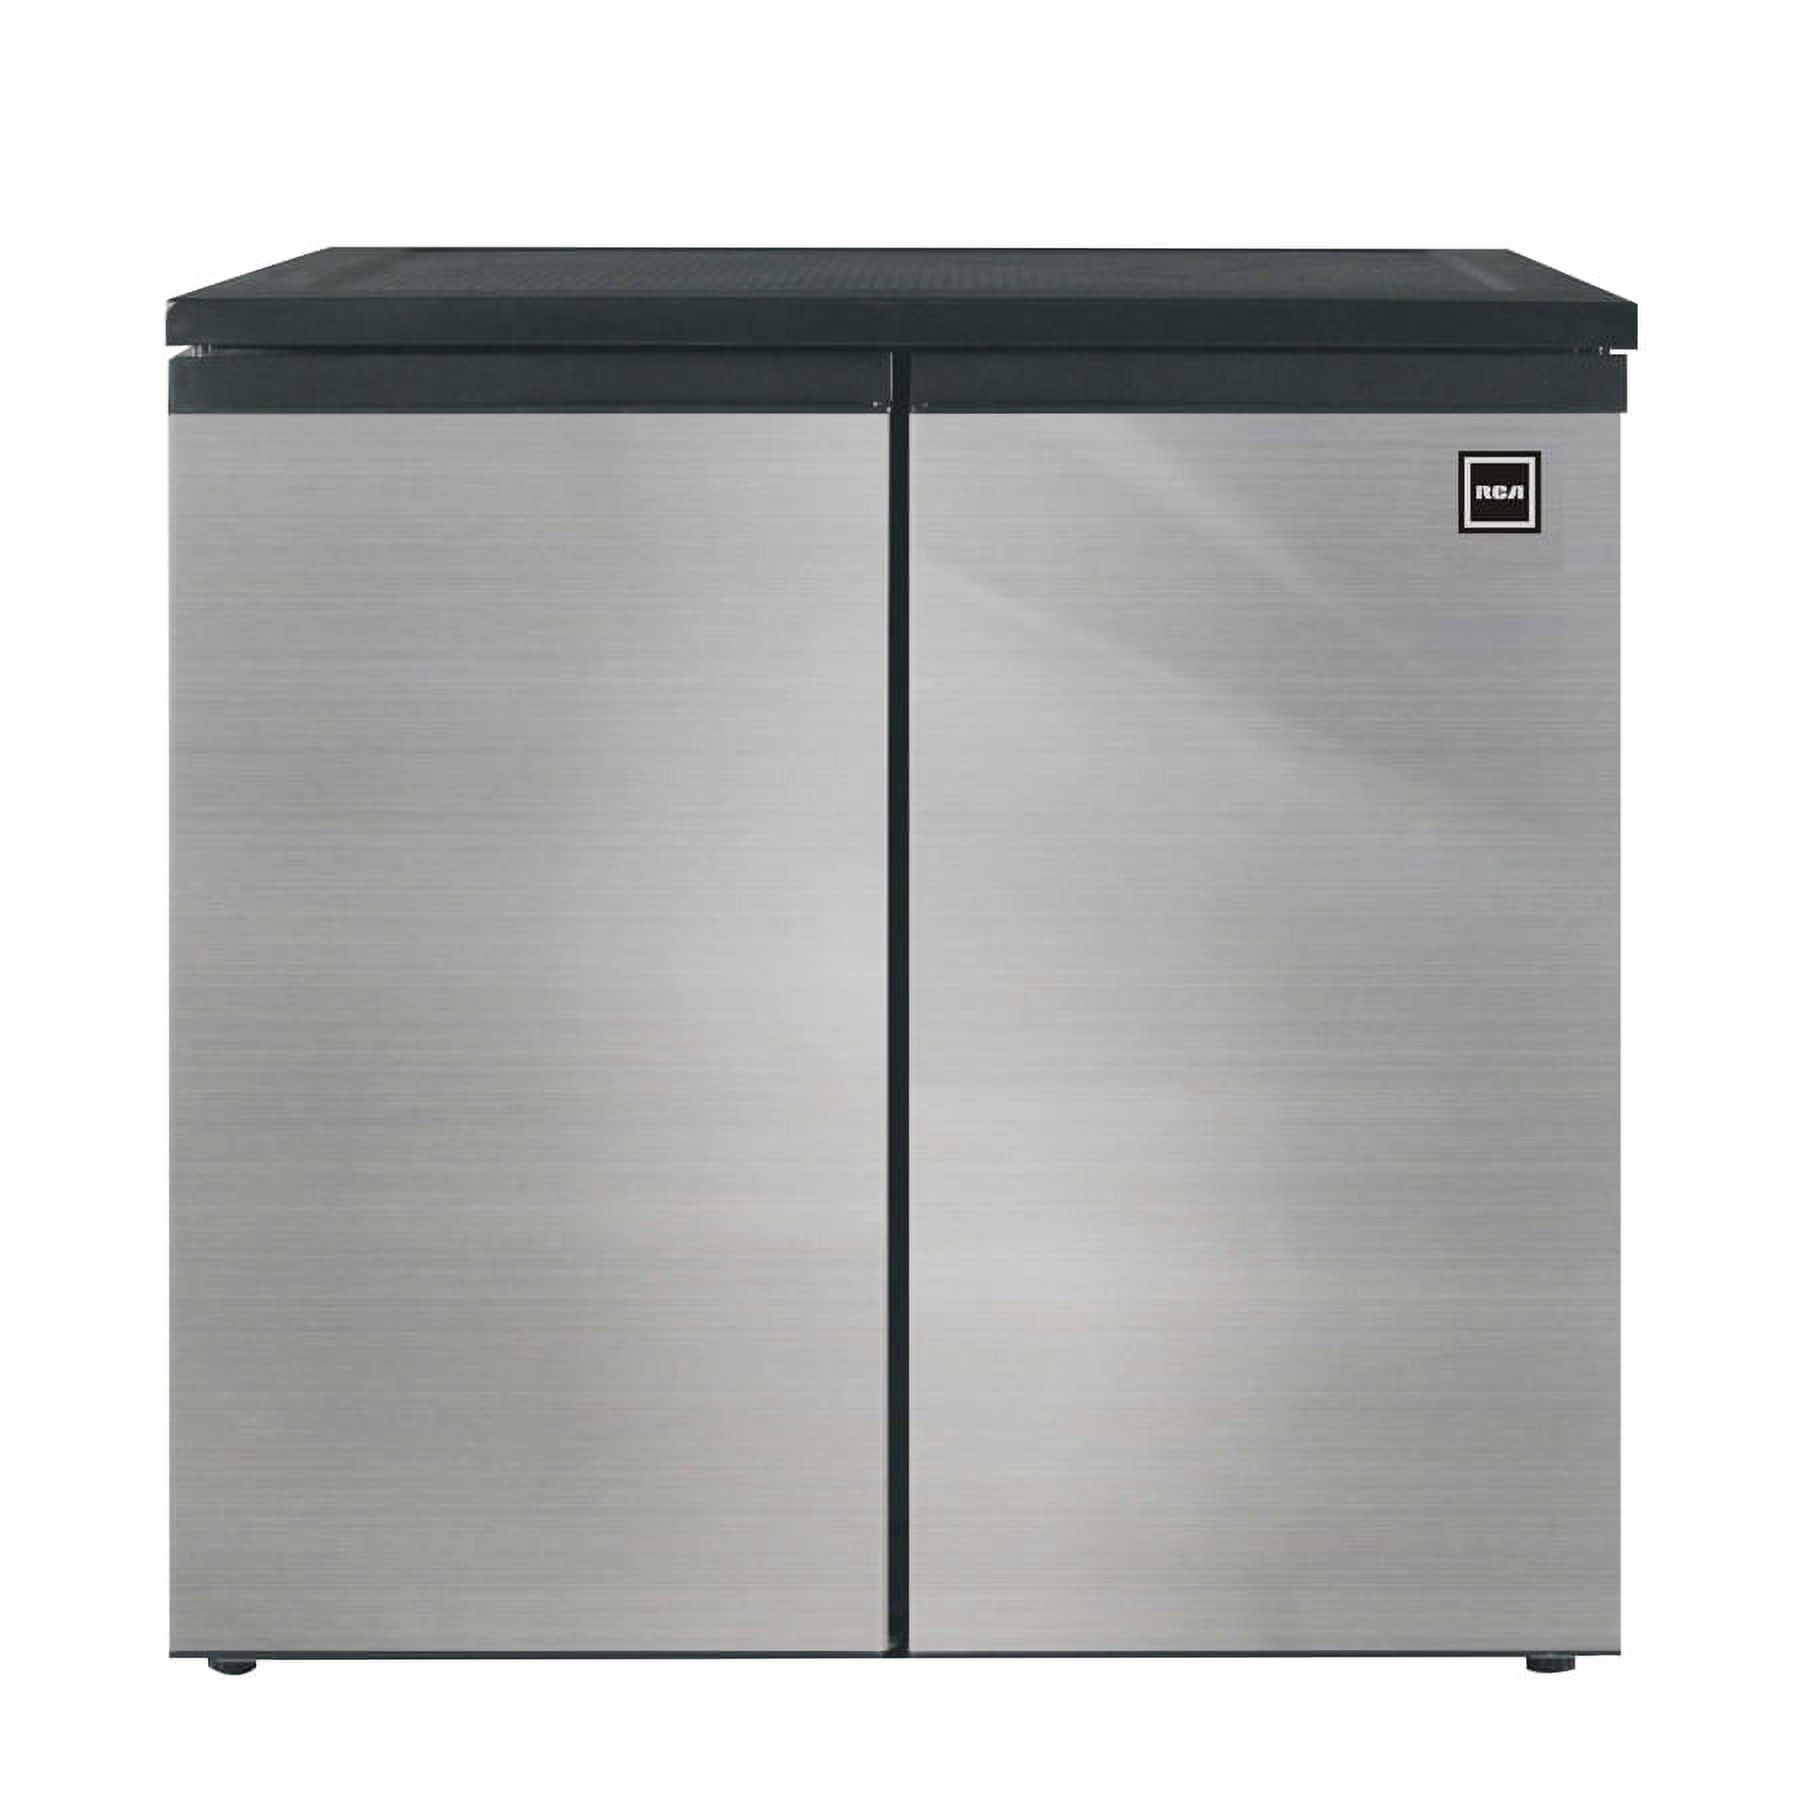 RCA 5.5 Cu. ft. Side by Side 2 Door Refrigerator/Freezer RFR551, Stainless Steel - image 1 of 5